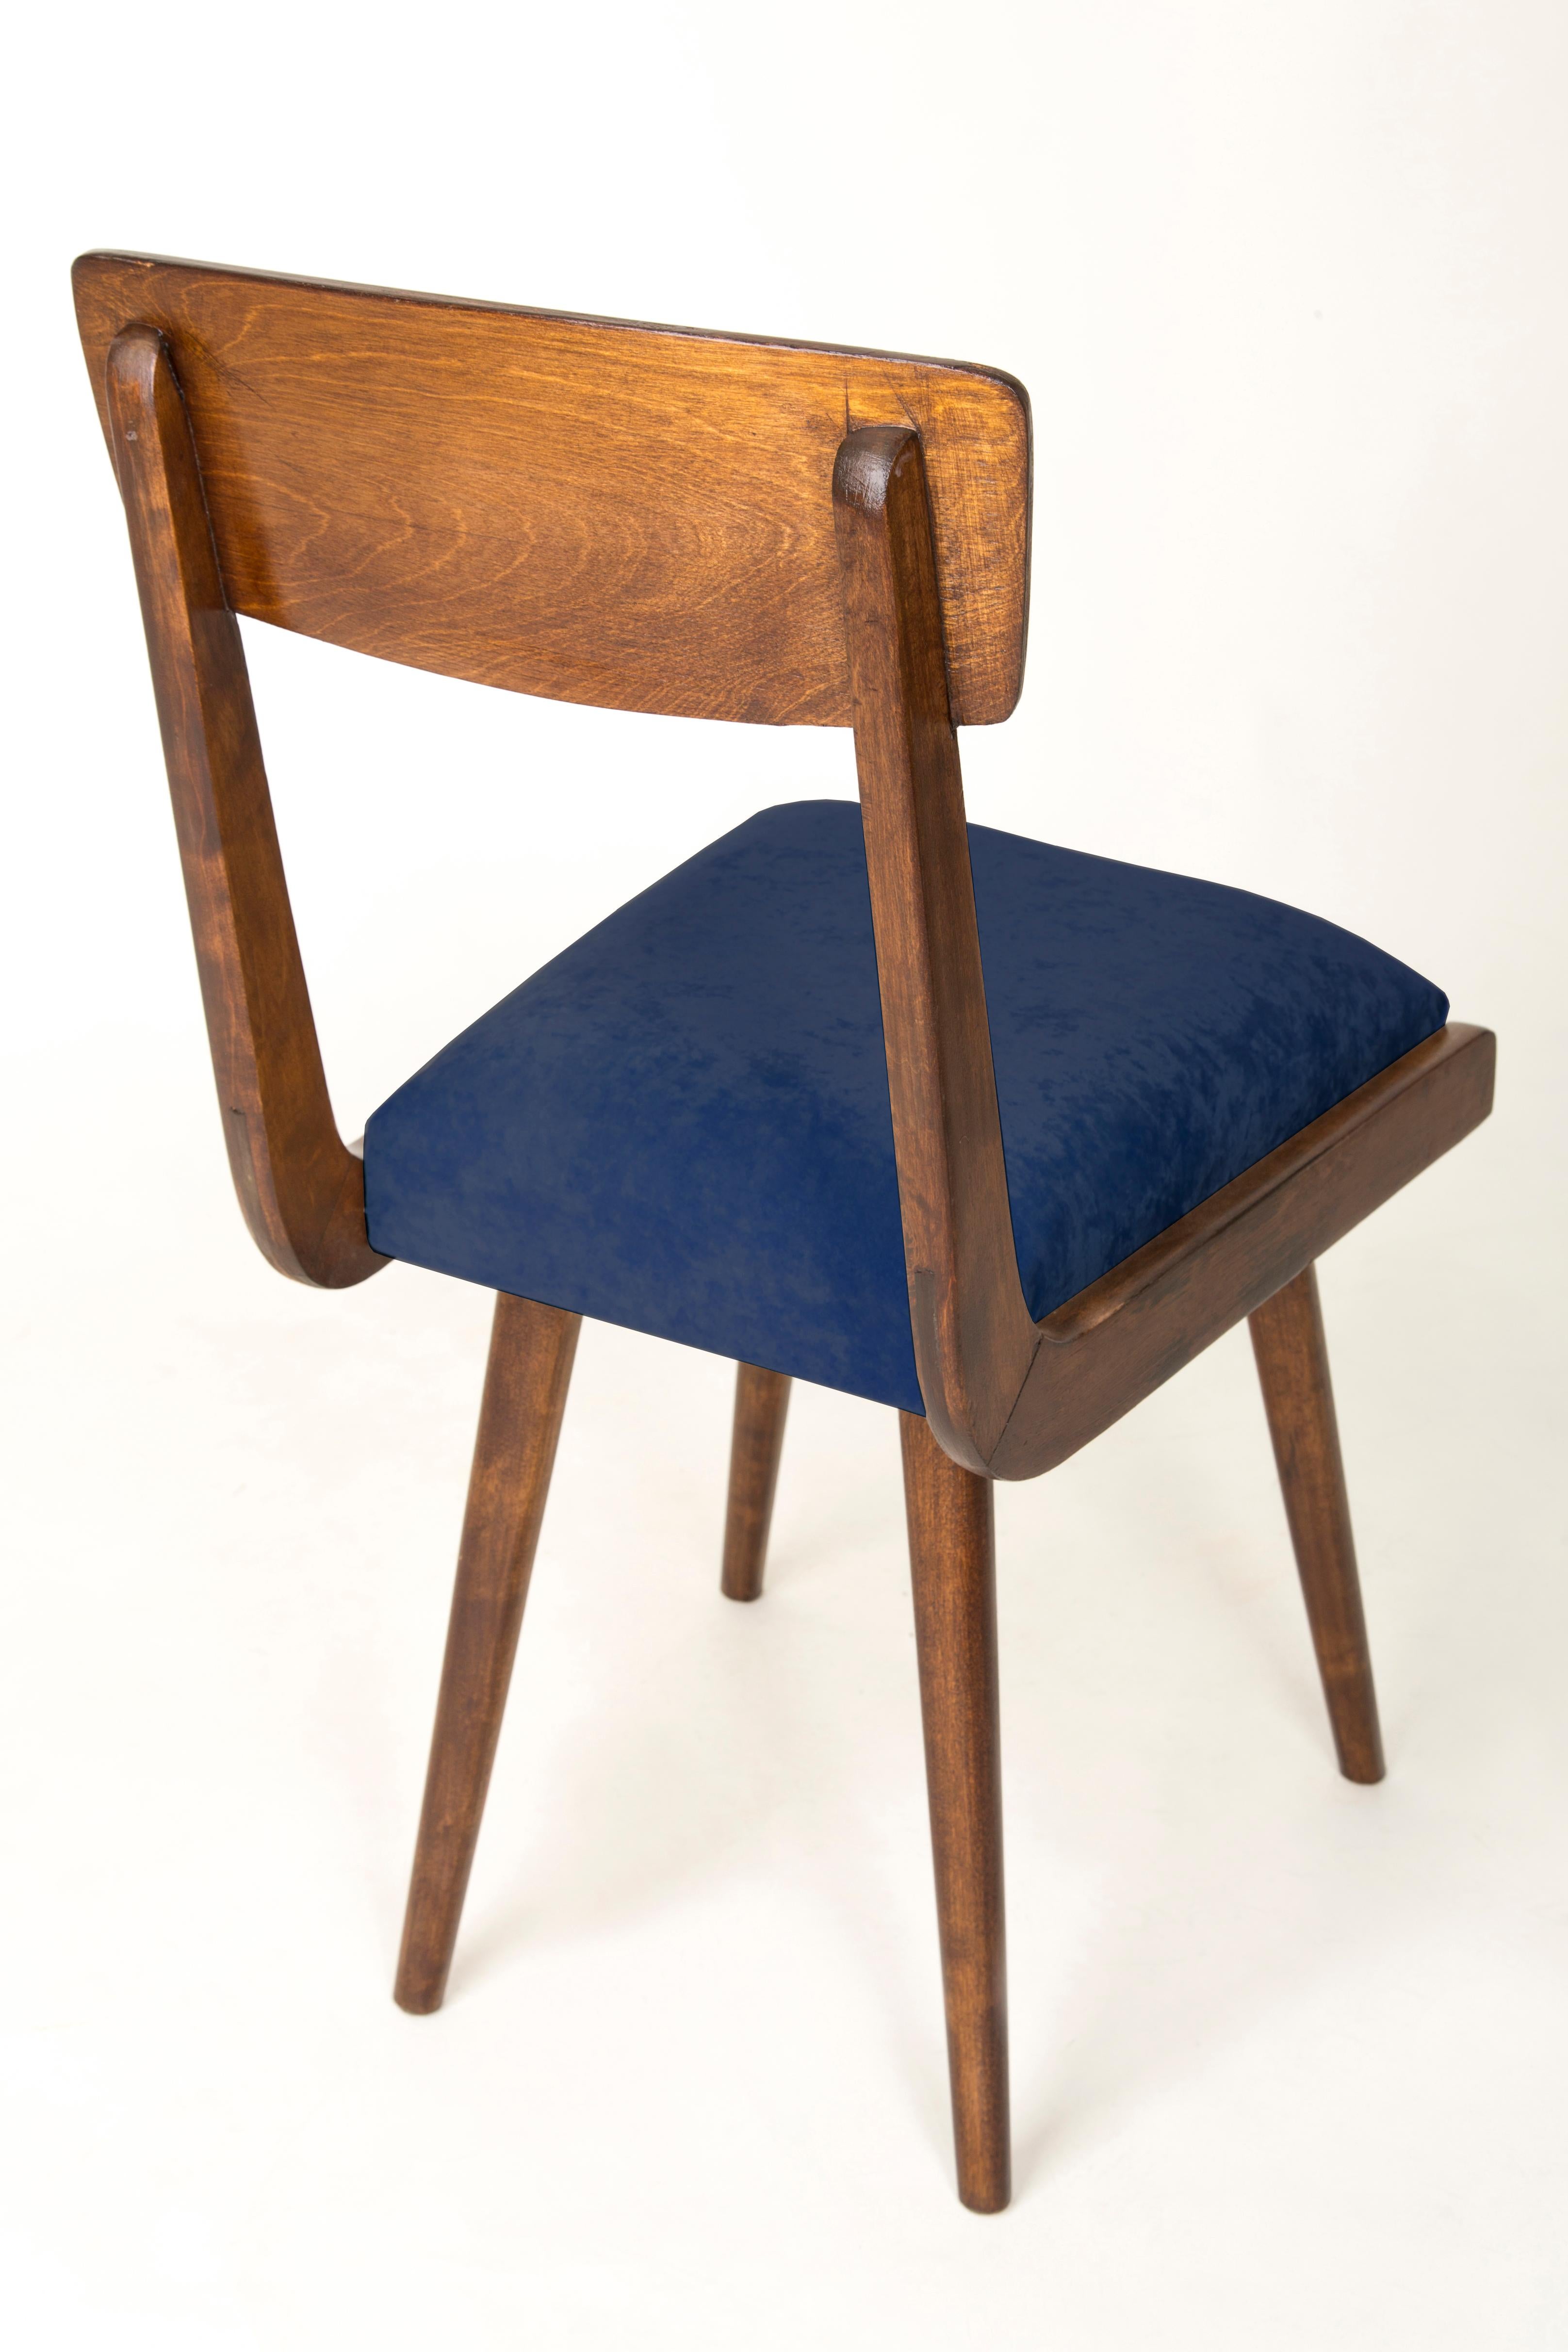 Polish Set of Four Mid Century Navy Blue Velvet Wood Chairs, Europe, 1960s For Sale